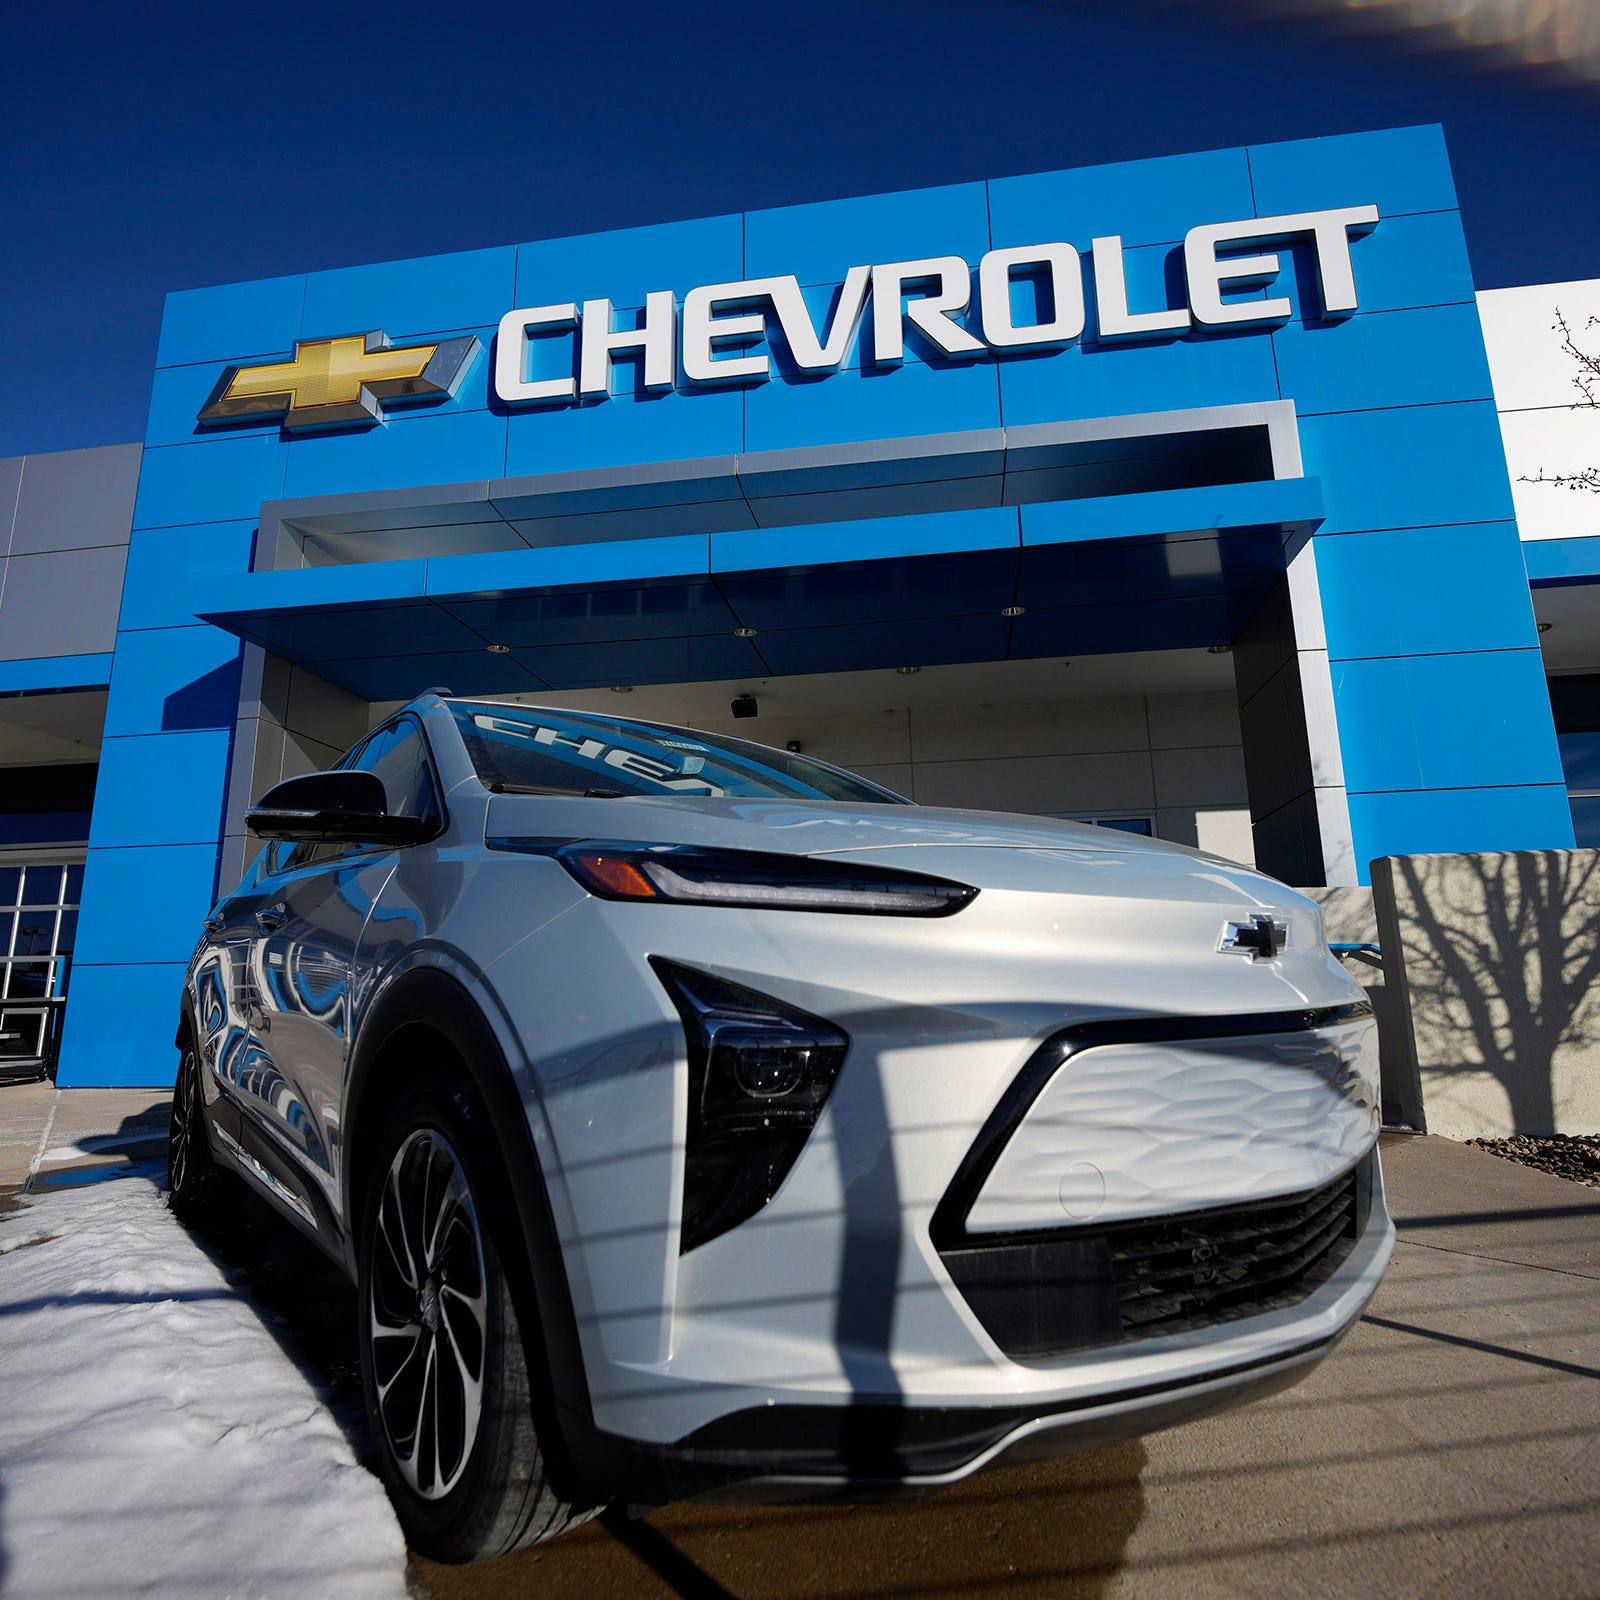 A lone, unsold 2022 Bolt electric vehicle sits on a lot at a Chevrolet dealership on Feb. 27, 2022, in Englewood, Colo.